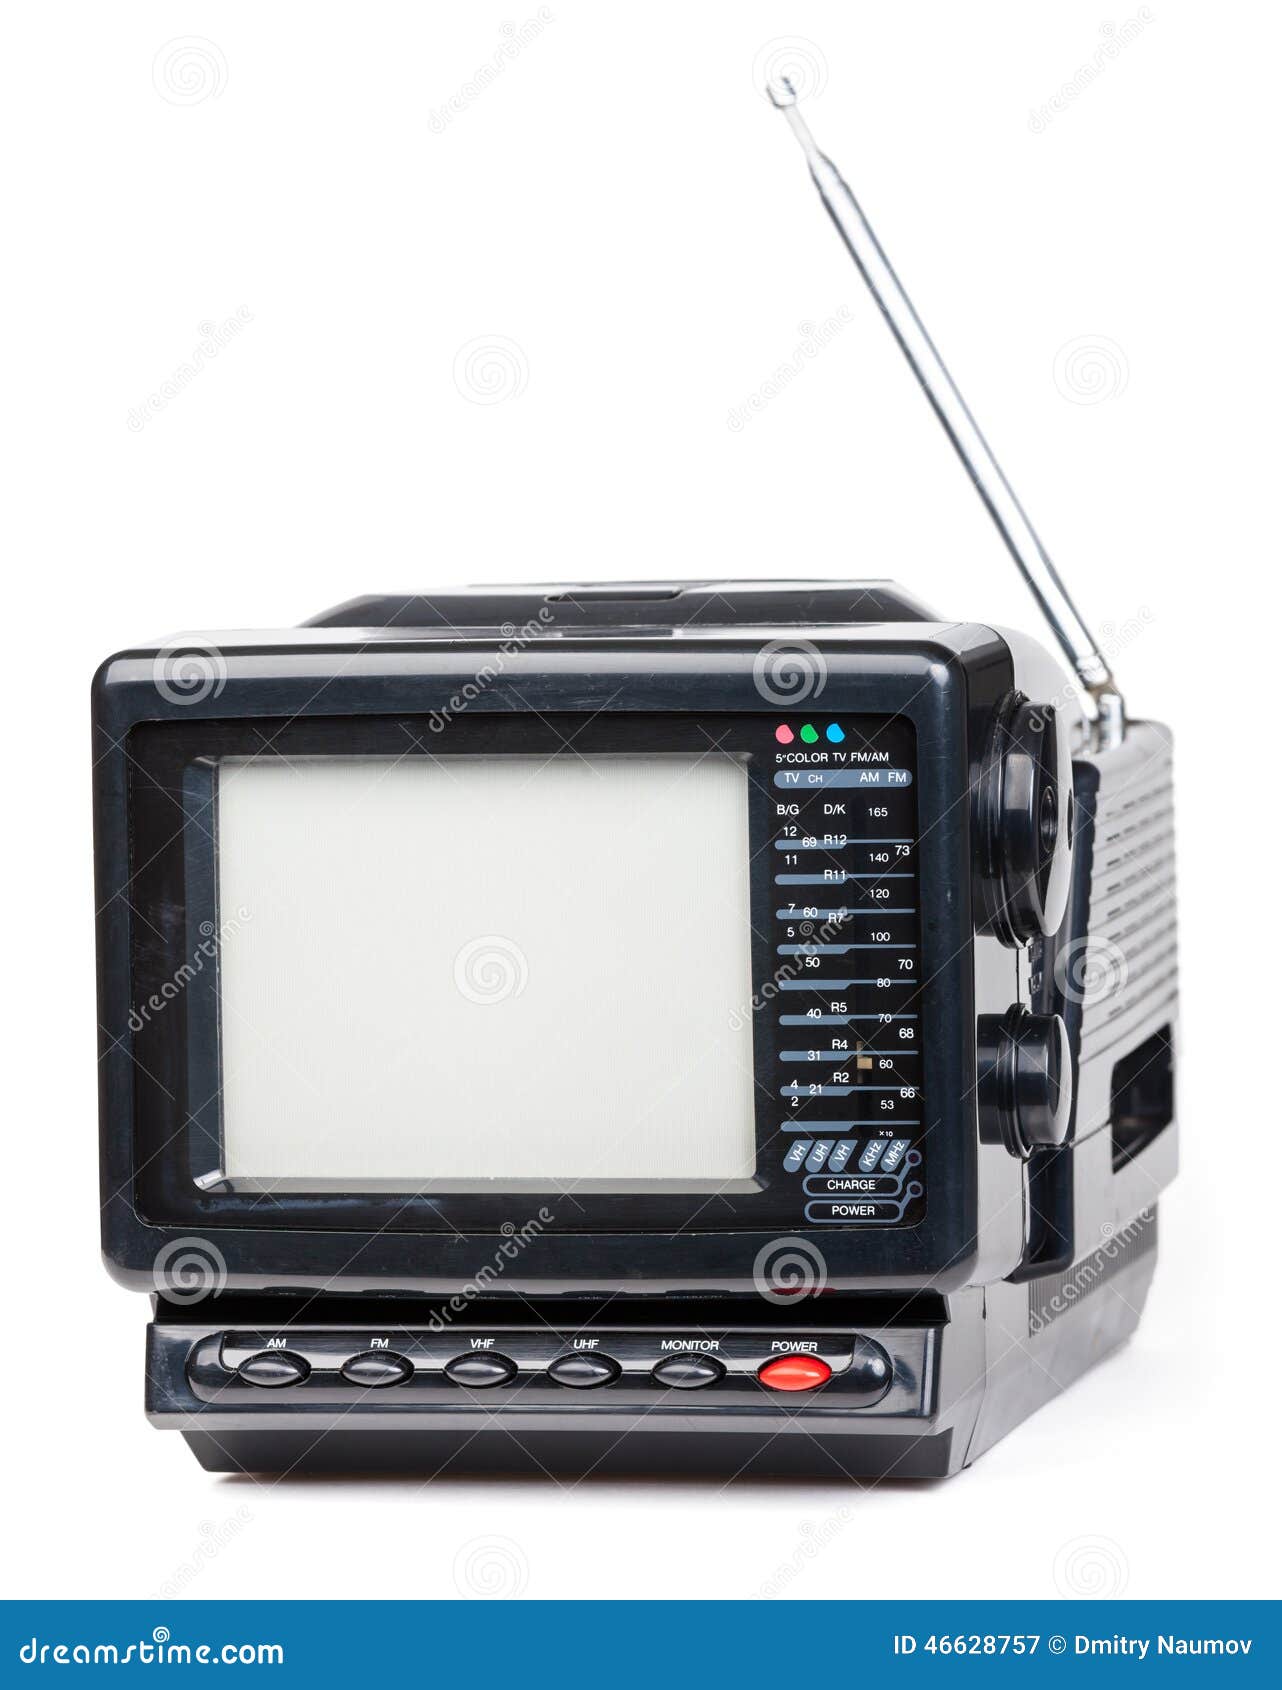 old-handheld-radio-television-set-isolated-vintage-small-portable-color-tv-white-background-46628757.jpg